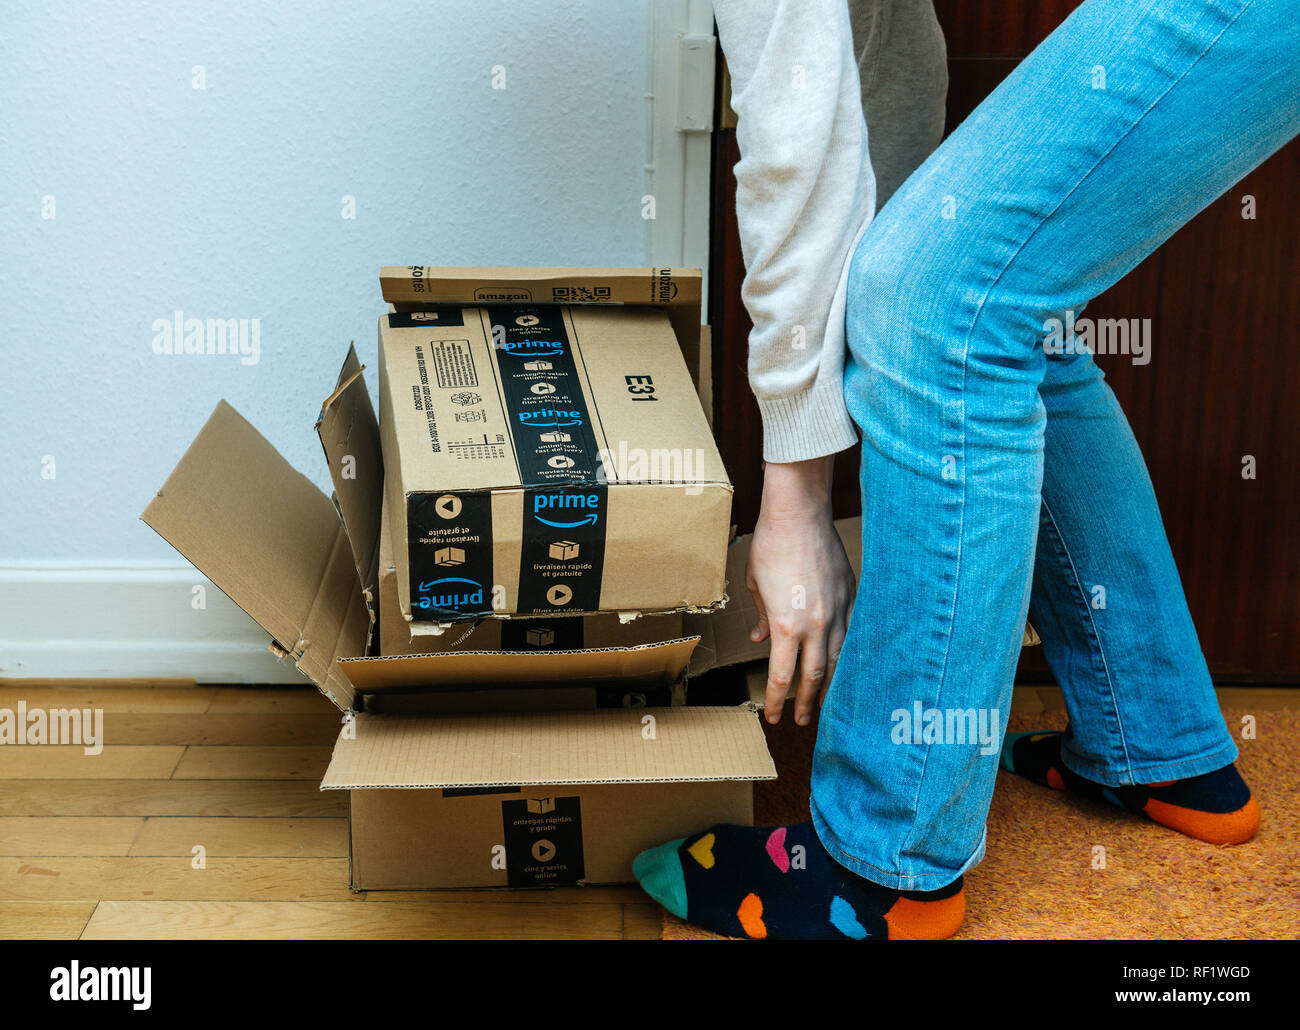 PARIS, FRANCE - JAN 13, 2018: Stack of Amazon Prime packages waste next  home door woman preparing to throw away to recycle the boxes Stock Photo -  Alamy